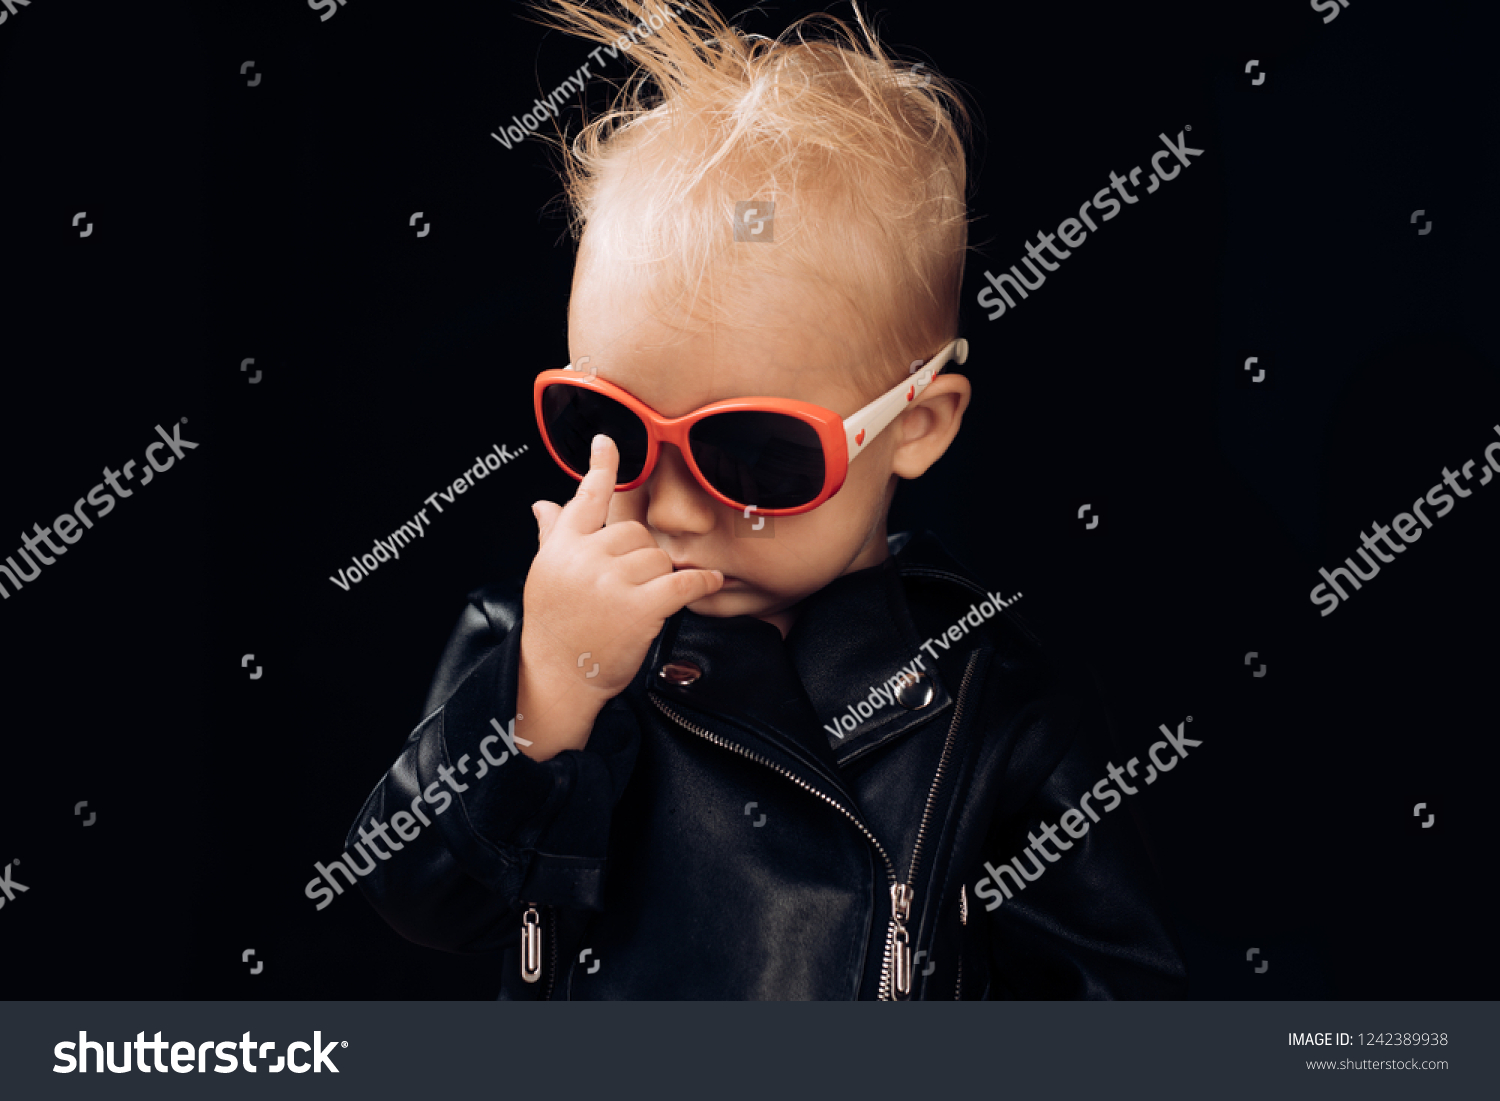 Born to be rock and roll star. Adorable small music fan. Little child boy in rocker jacket and sunglasses. Little rock star. Rock style child. Rock and roll fashion trend. Music for children. #1242389938